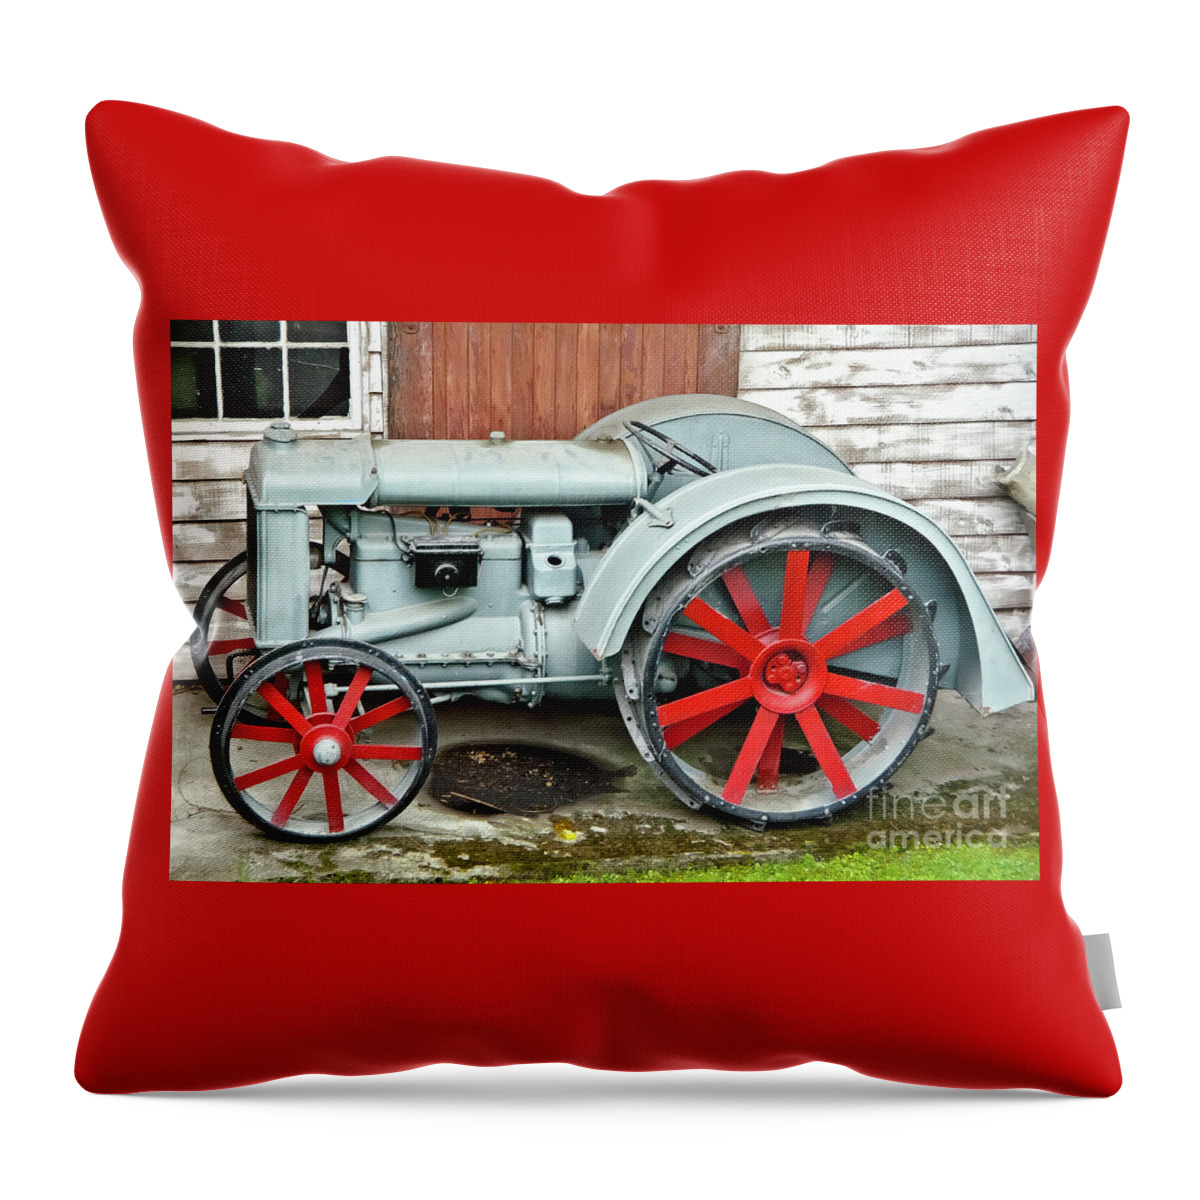 Tractor Throw Pillow featuring the photograph Old Tractor by Yurix Sardinelly